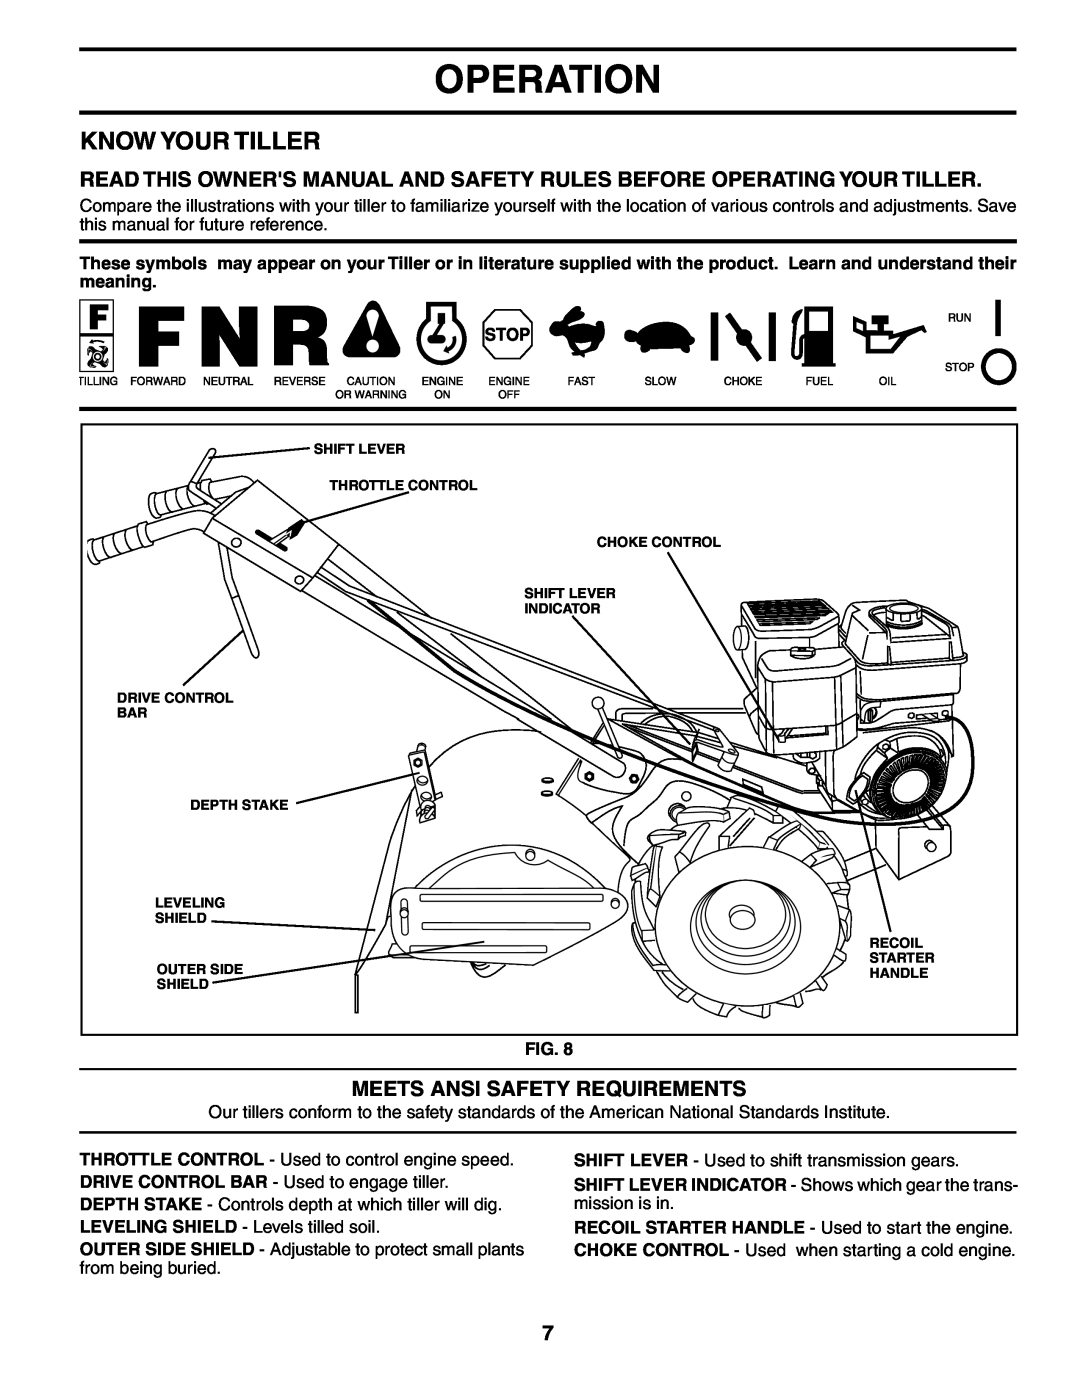 Poulan 190388 owner manual Operation, Know Your Tiller, Meets Ansi Safety Requirements 